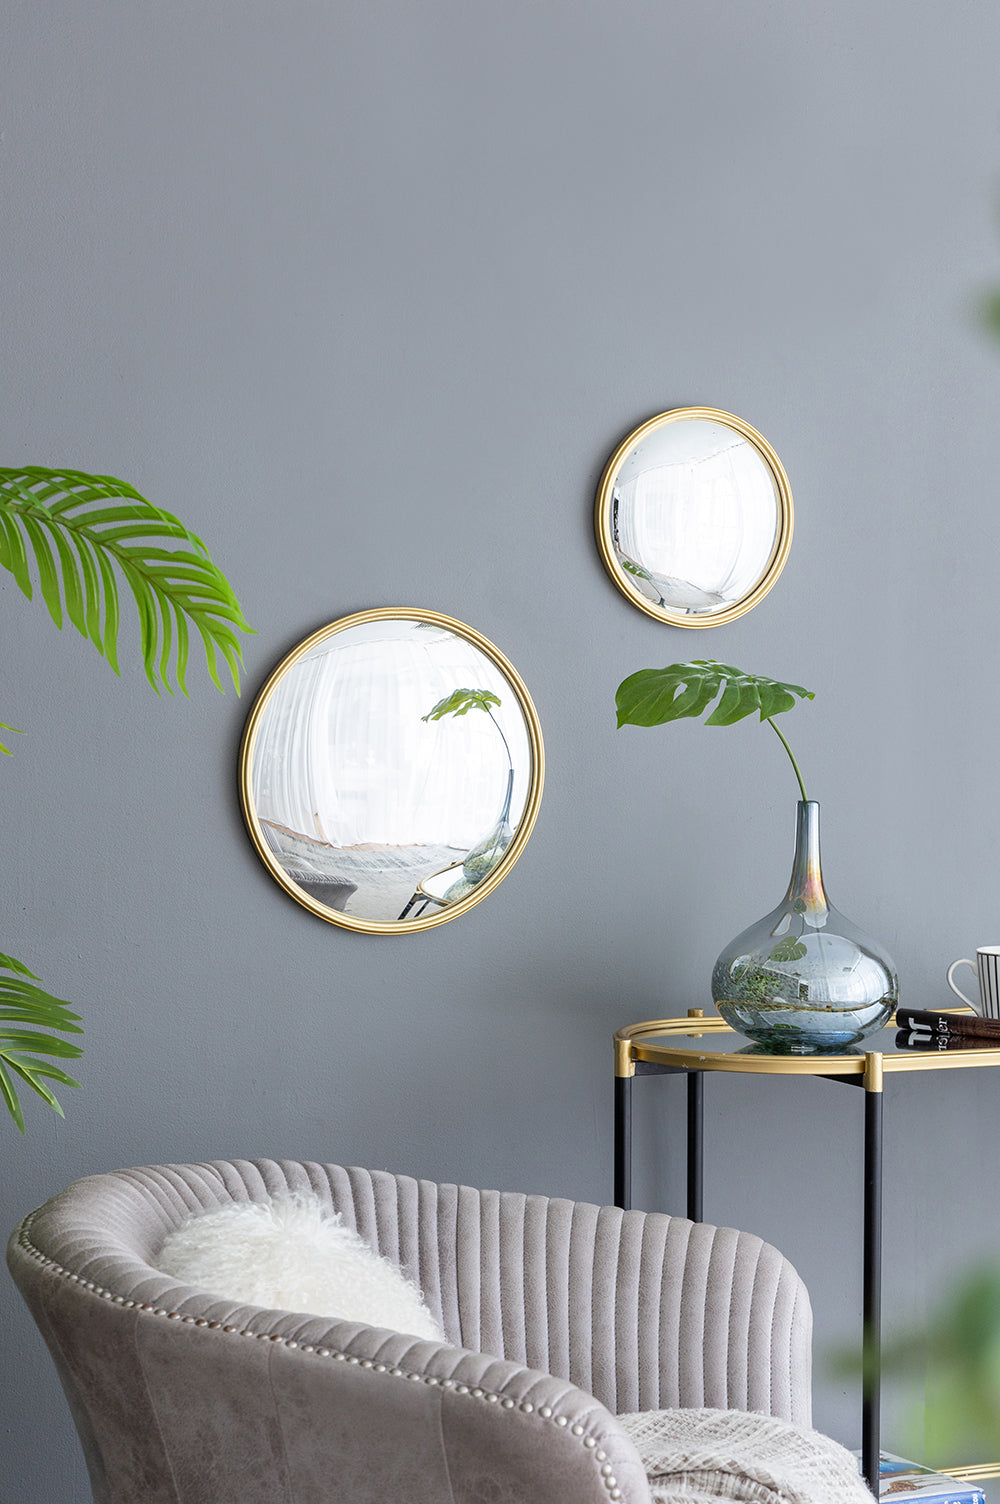 D15" Gold Round Mirror | Convex Wall Mirror with Iron Frame